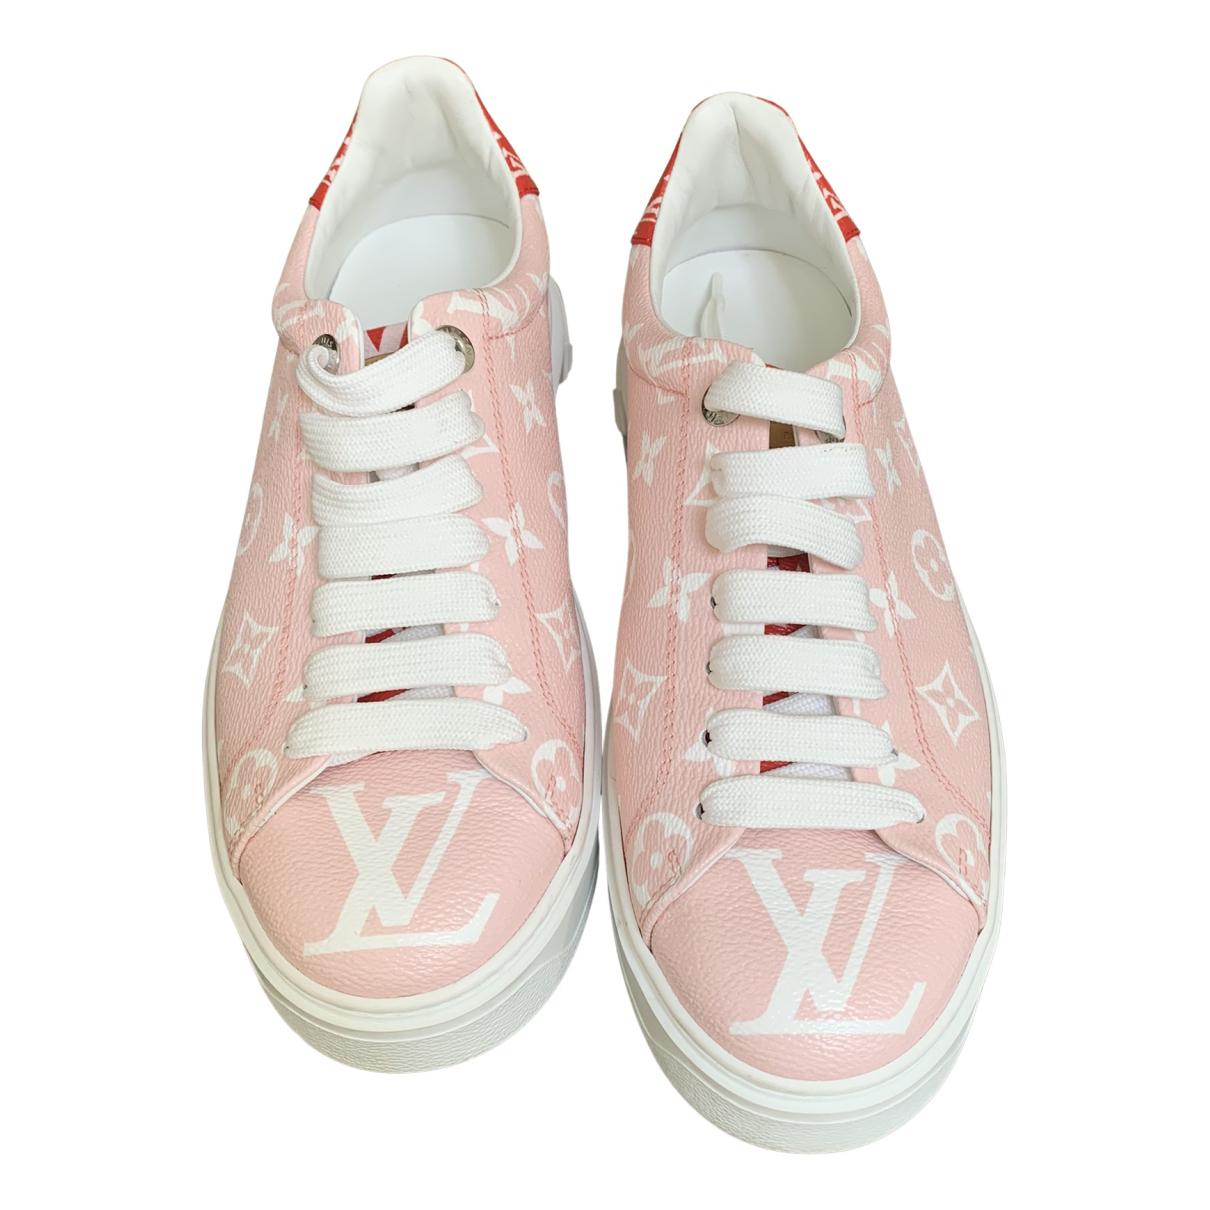 Time out leather trainers Louis Vuitton Red size 36 EU in Leather